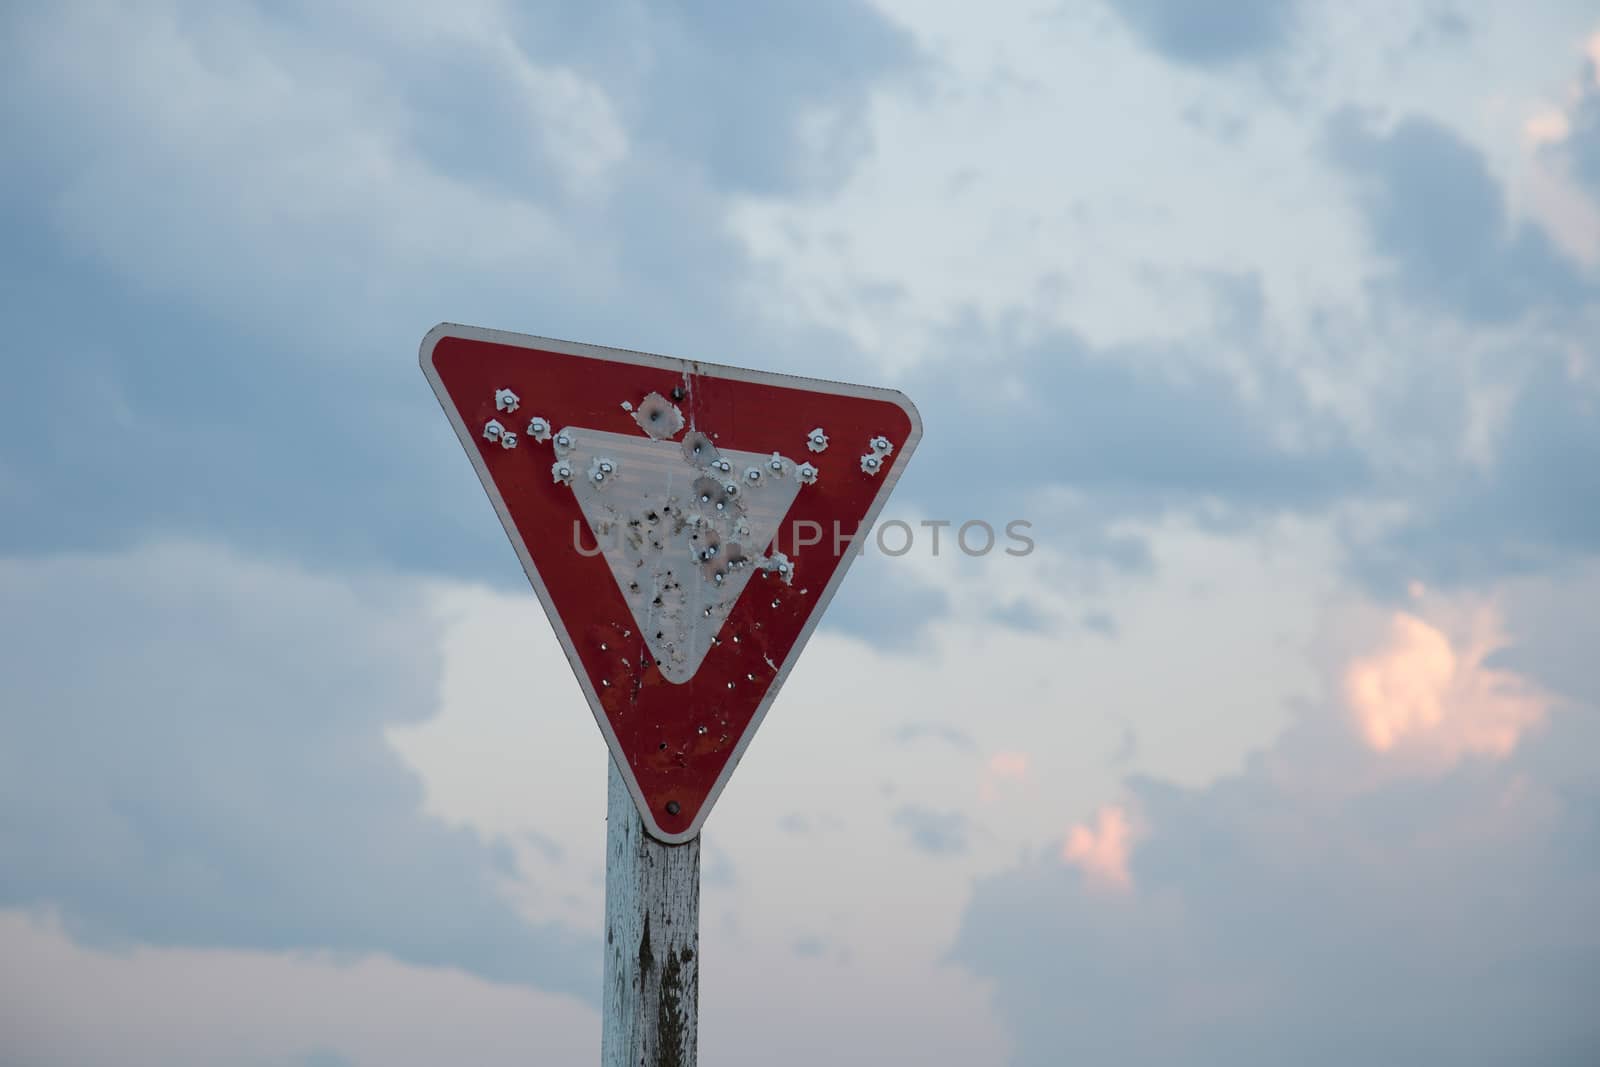 An old yield sign that has been shot multiple times.